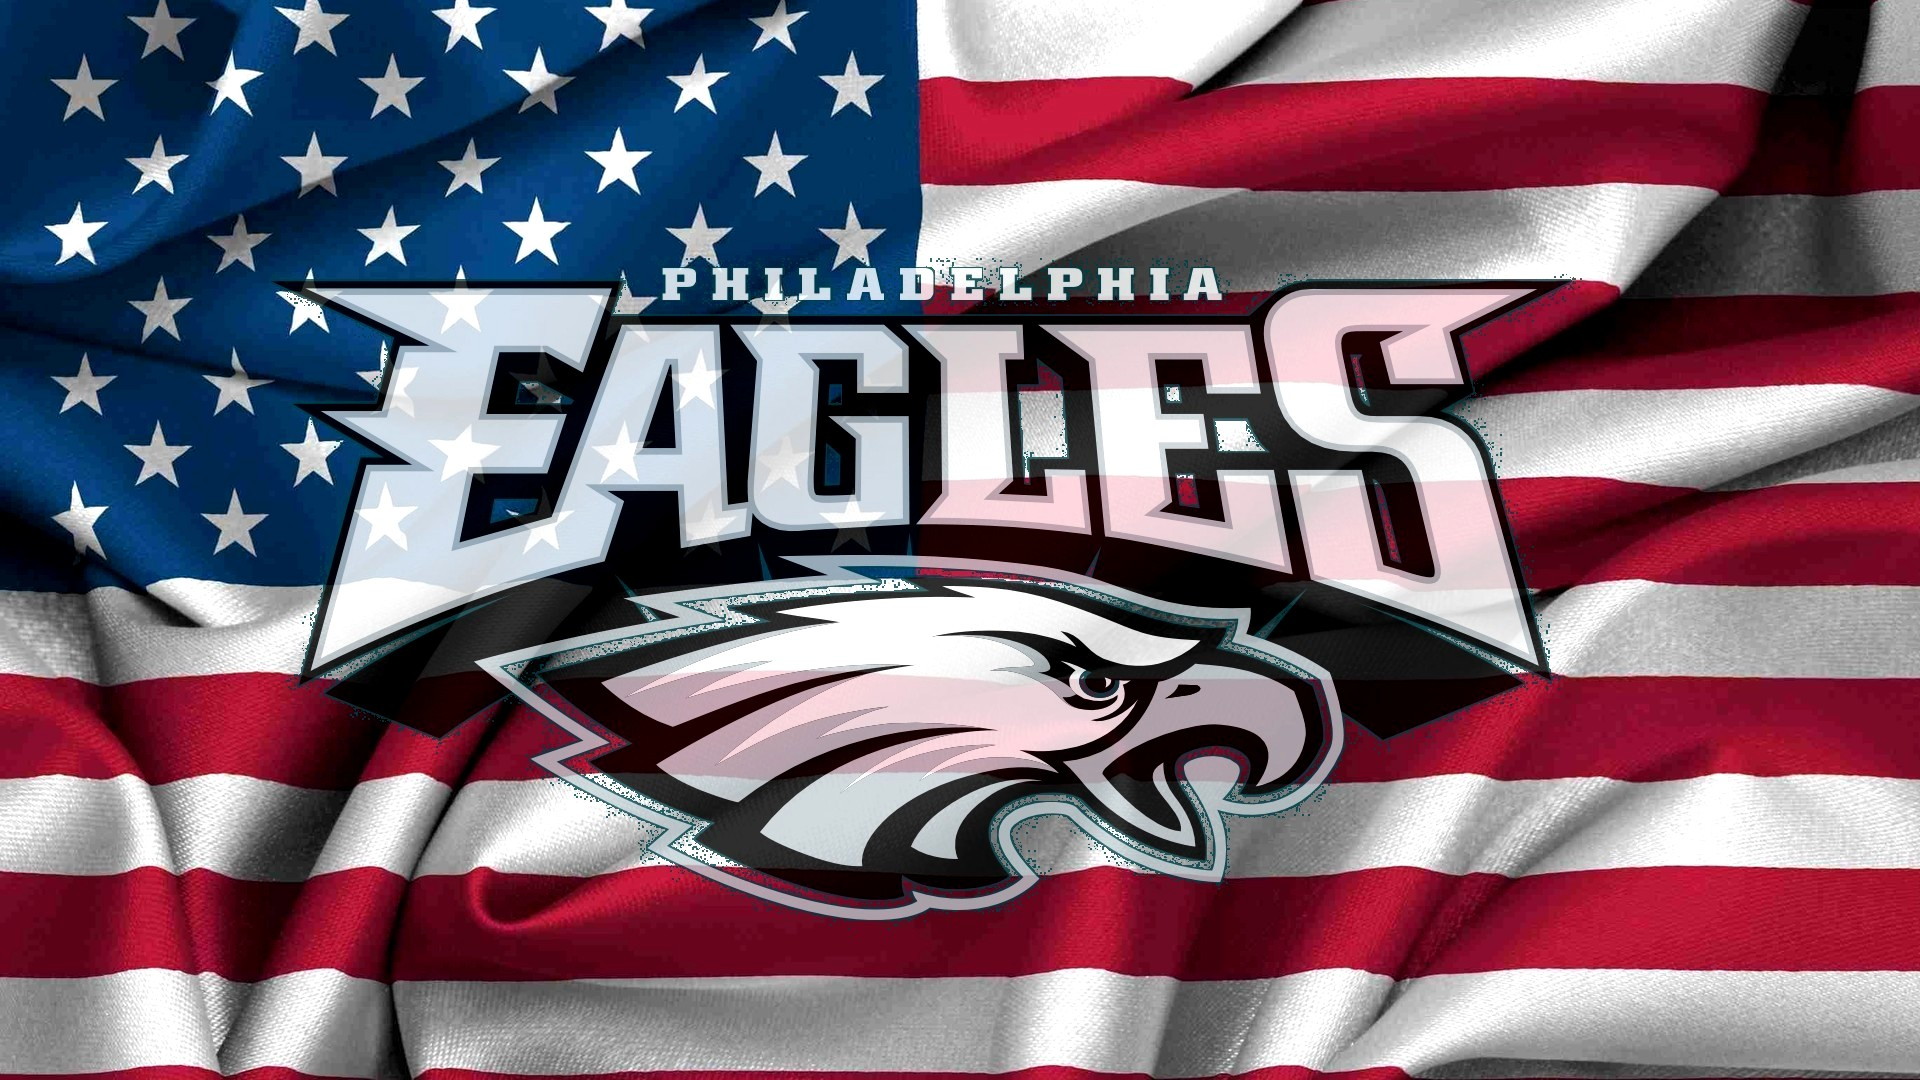 Philadelphia Eagles Desktop Wallpaper HD with high-resolution 1920x1080 pixel. You can use and set as wallpaper for Notebook Screensavers, Mac Wallpapers, Mobile Home Screen, iPhone or Android Phones Lock Screen